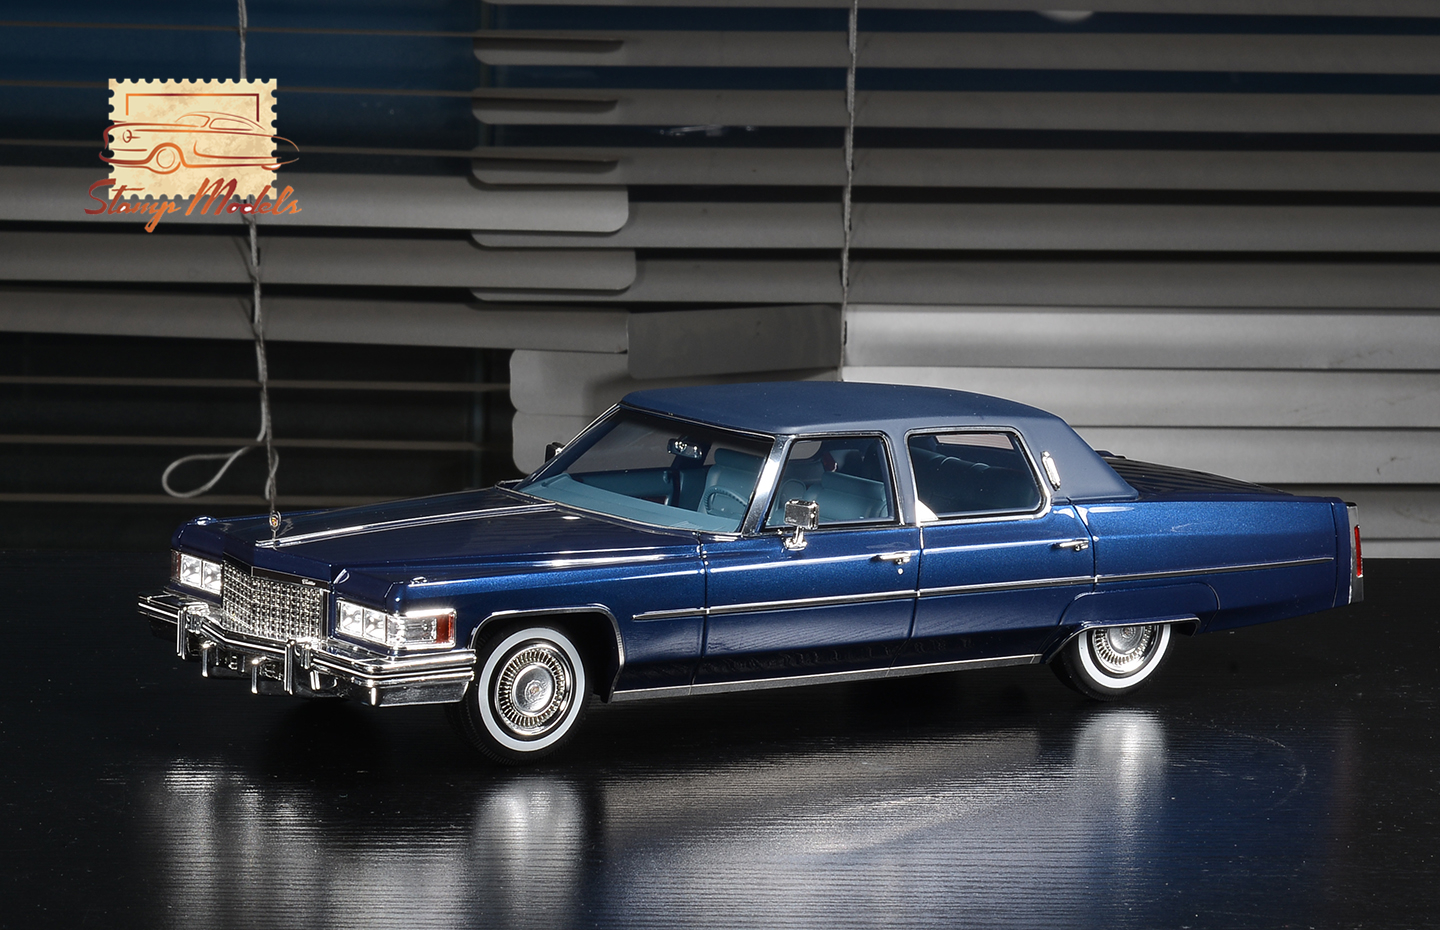 1/18 STM1976203 1976 Cadillac Fleetwood Sixty Special Brougham Commodore Blue